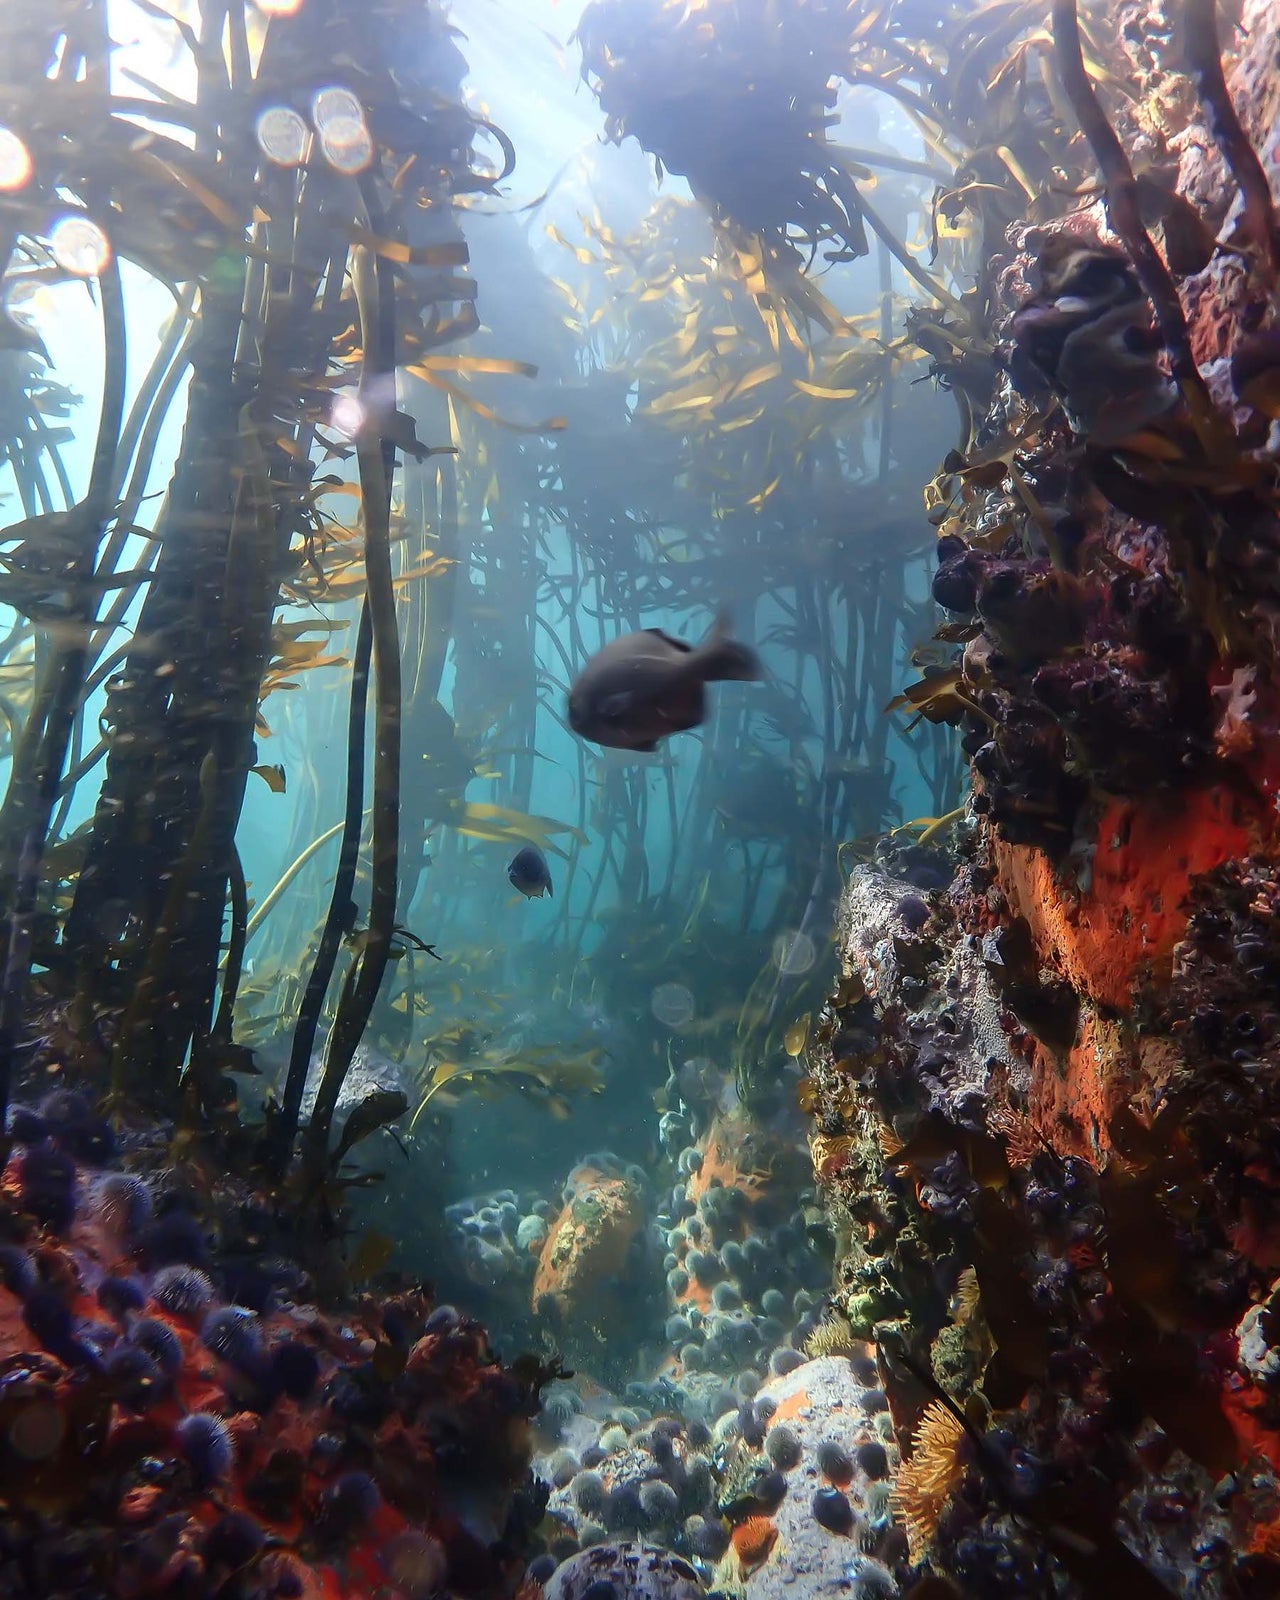 Photographer : Keri Muller - Swimming through the Kelp Forests in False Bay in South Africa